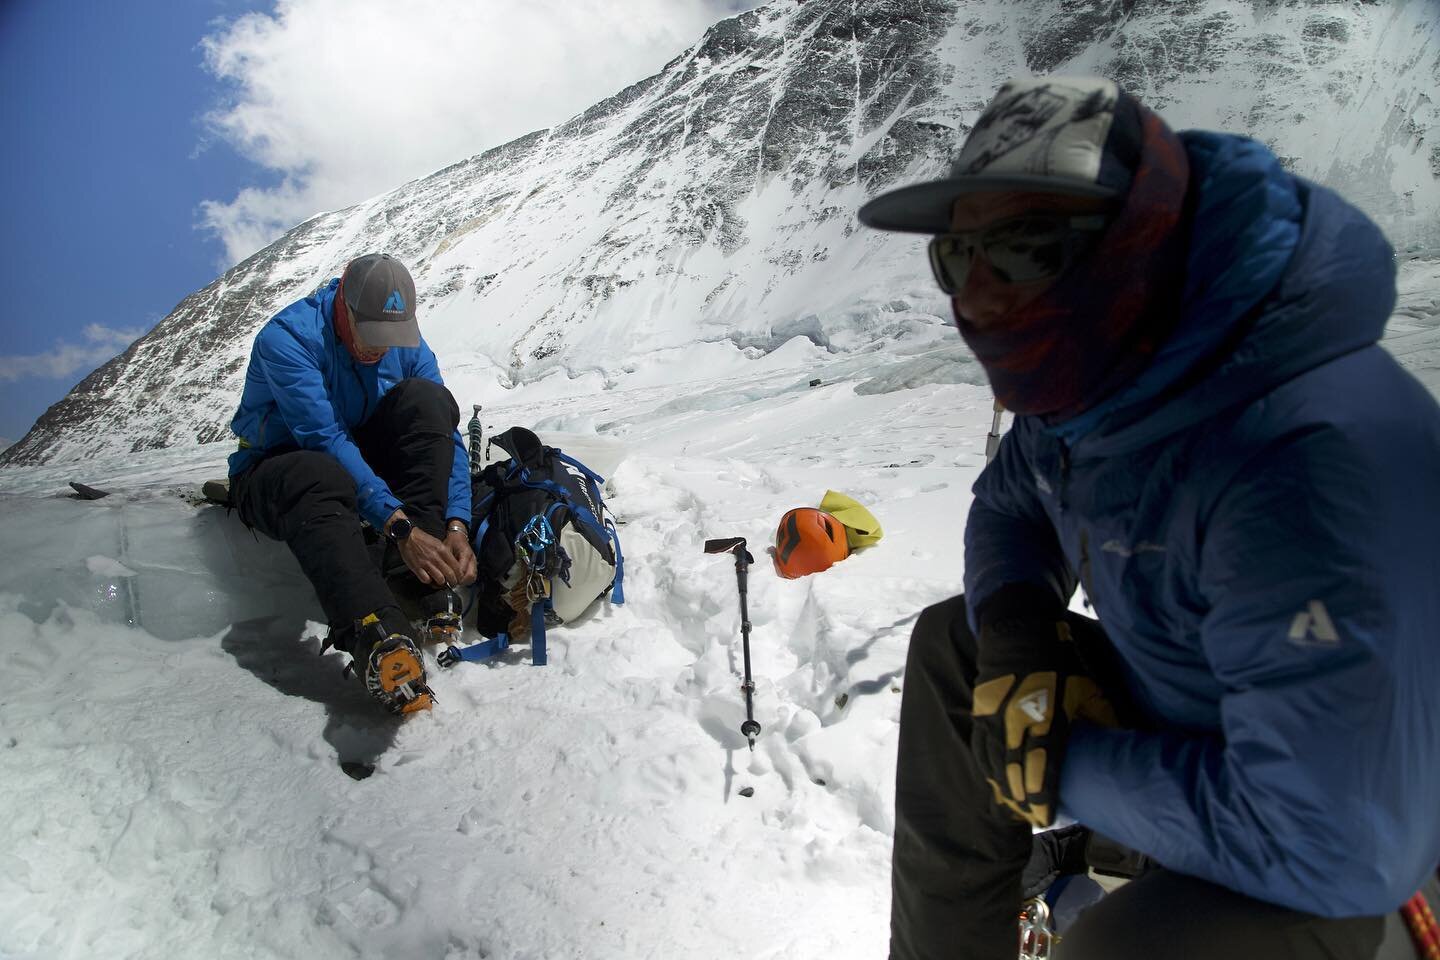 &lsquo;To Live or Die on Everest&rsquo; premieres TONIGHT on @discovery at 9pm ET/PT! Don&rsquo;t miss this documentary that spotlights the events of one of the most-deadly climbing seasons ever on Everest in the spring of 2019 @toliveordieoneverest 